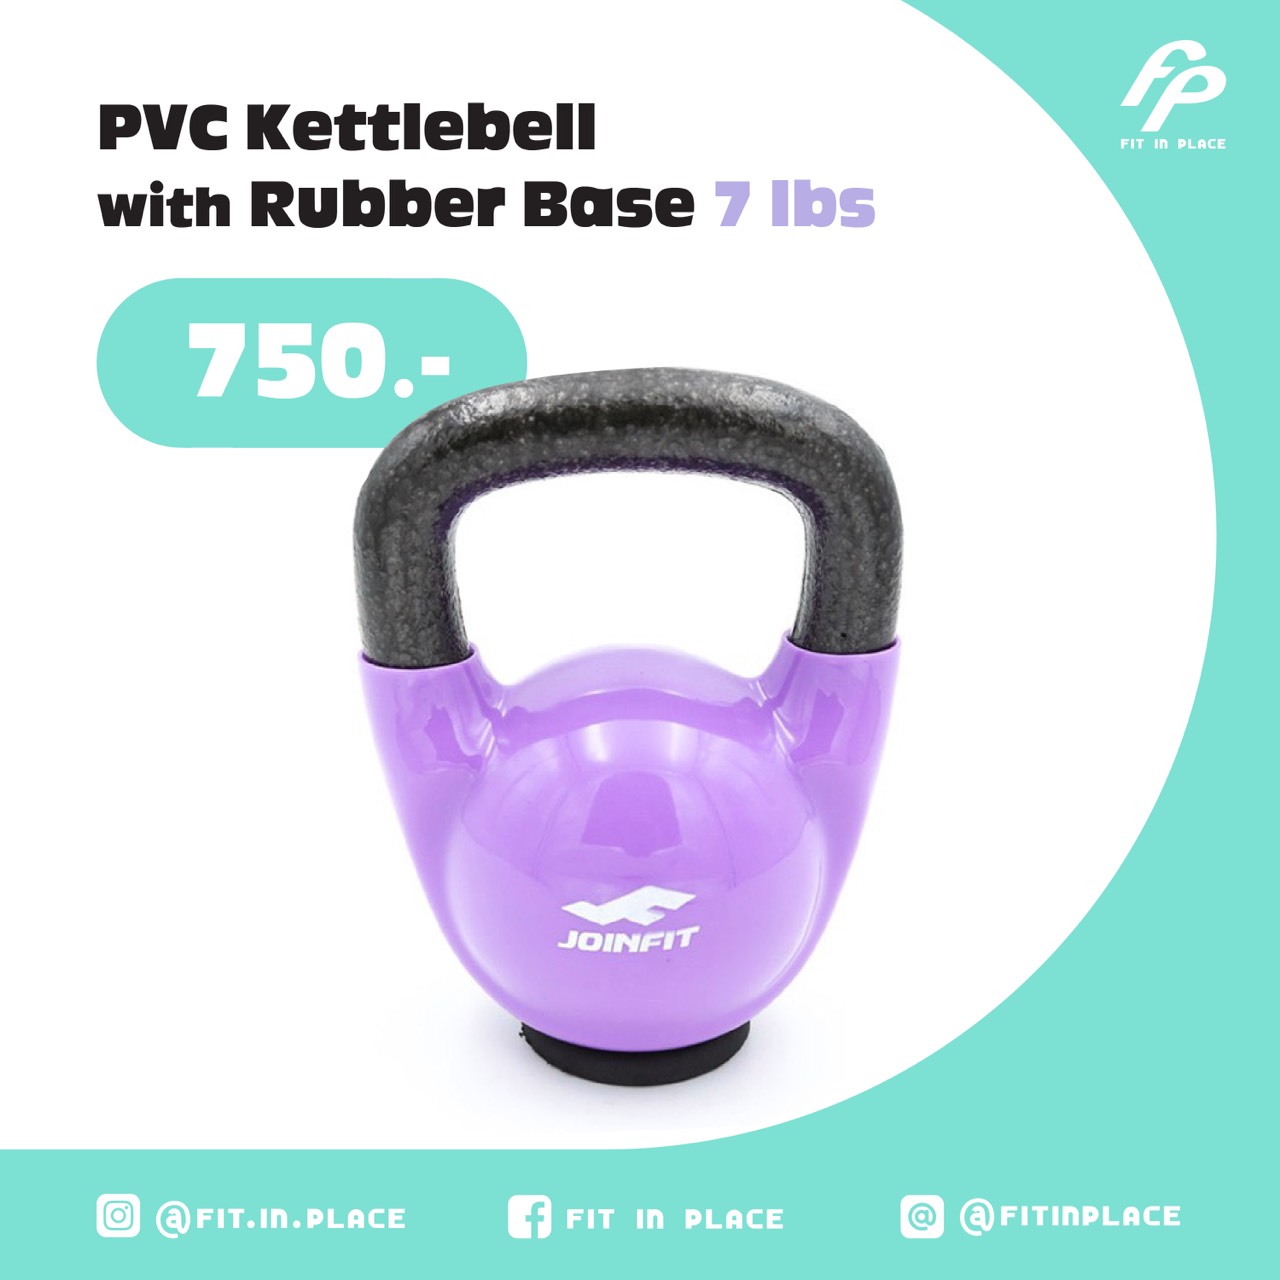 Fit in Place - Joinfit PVC Kettlebell with Rubber Base 7lbs